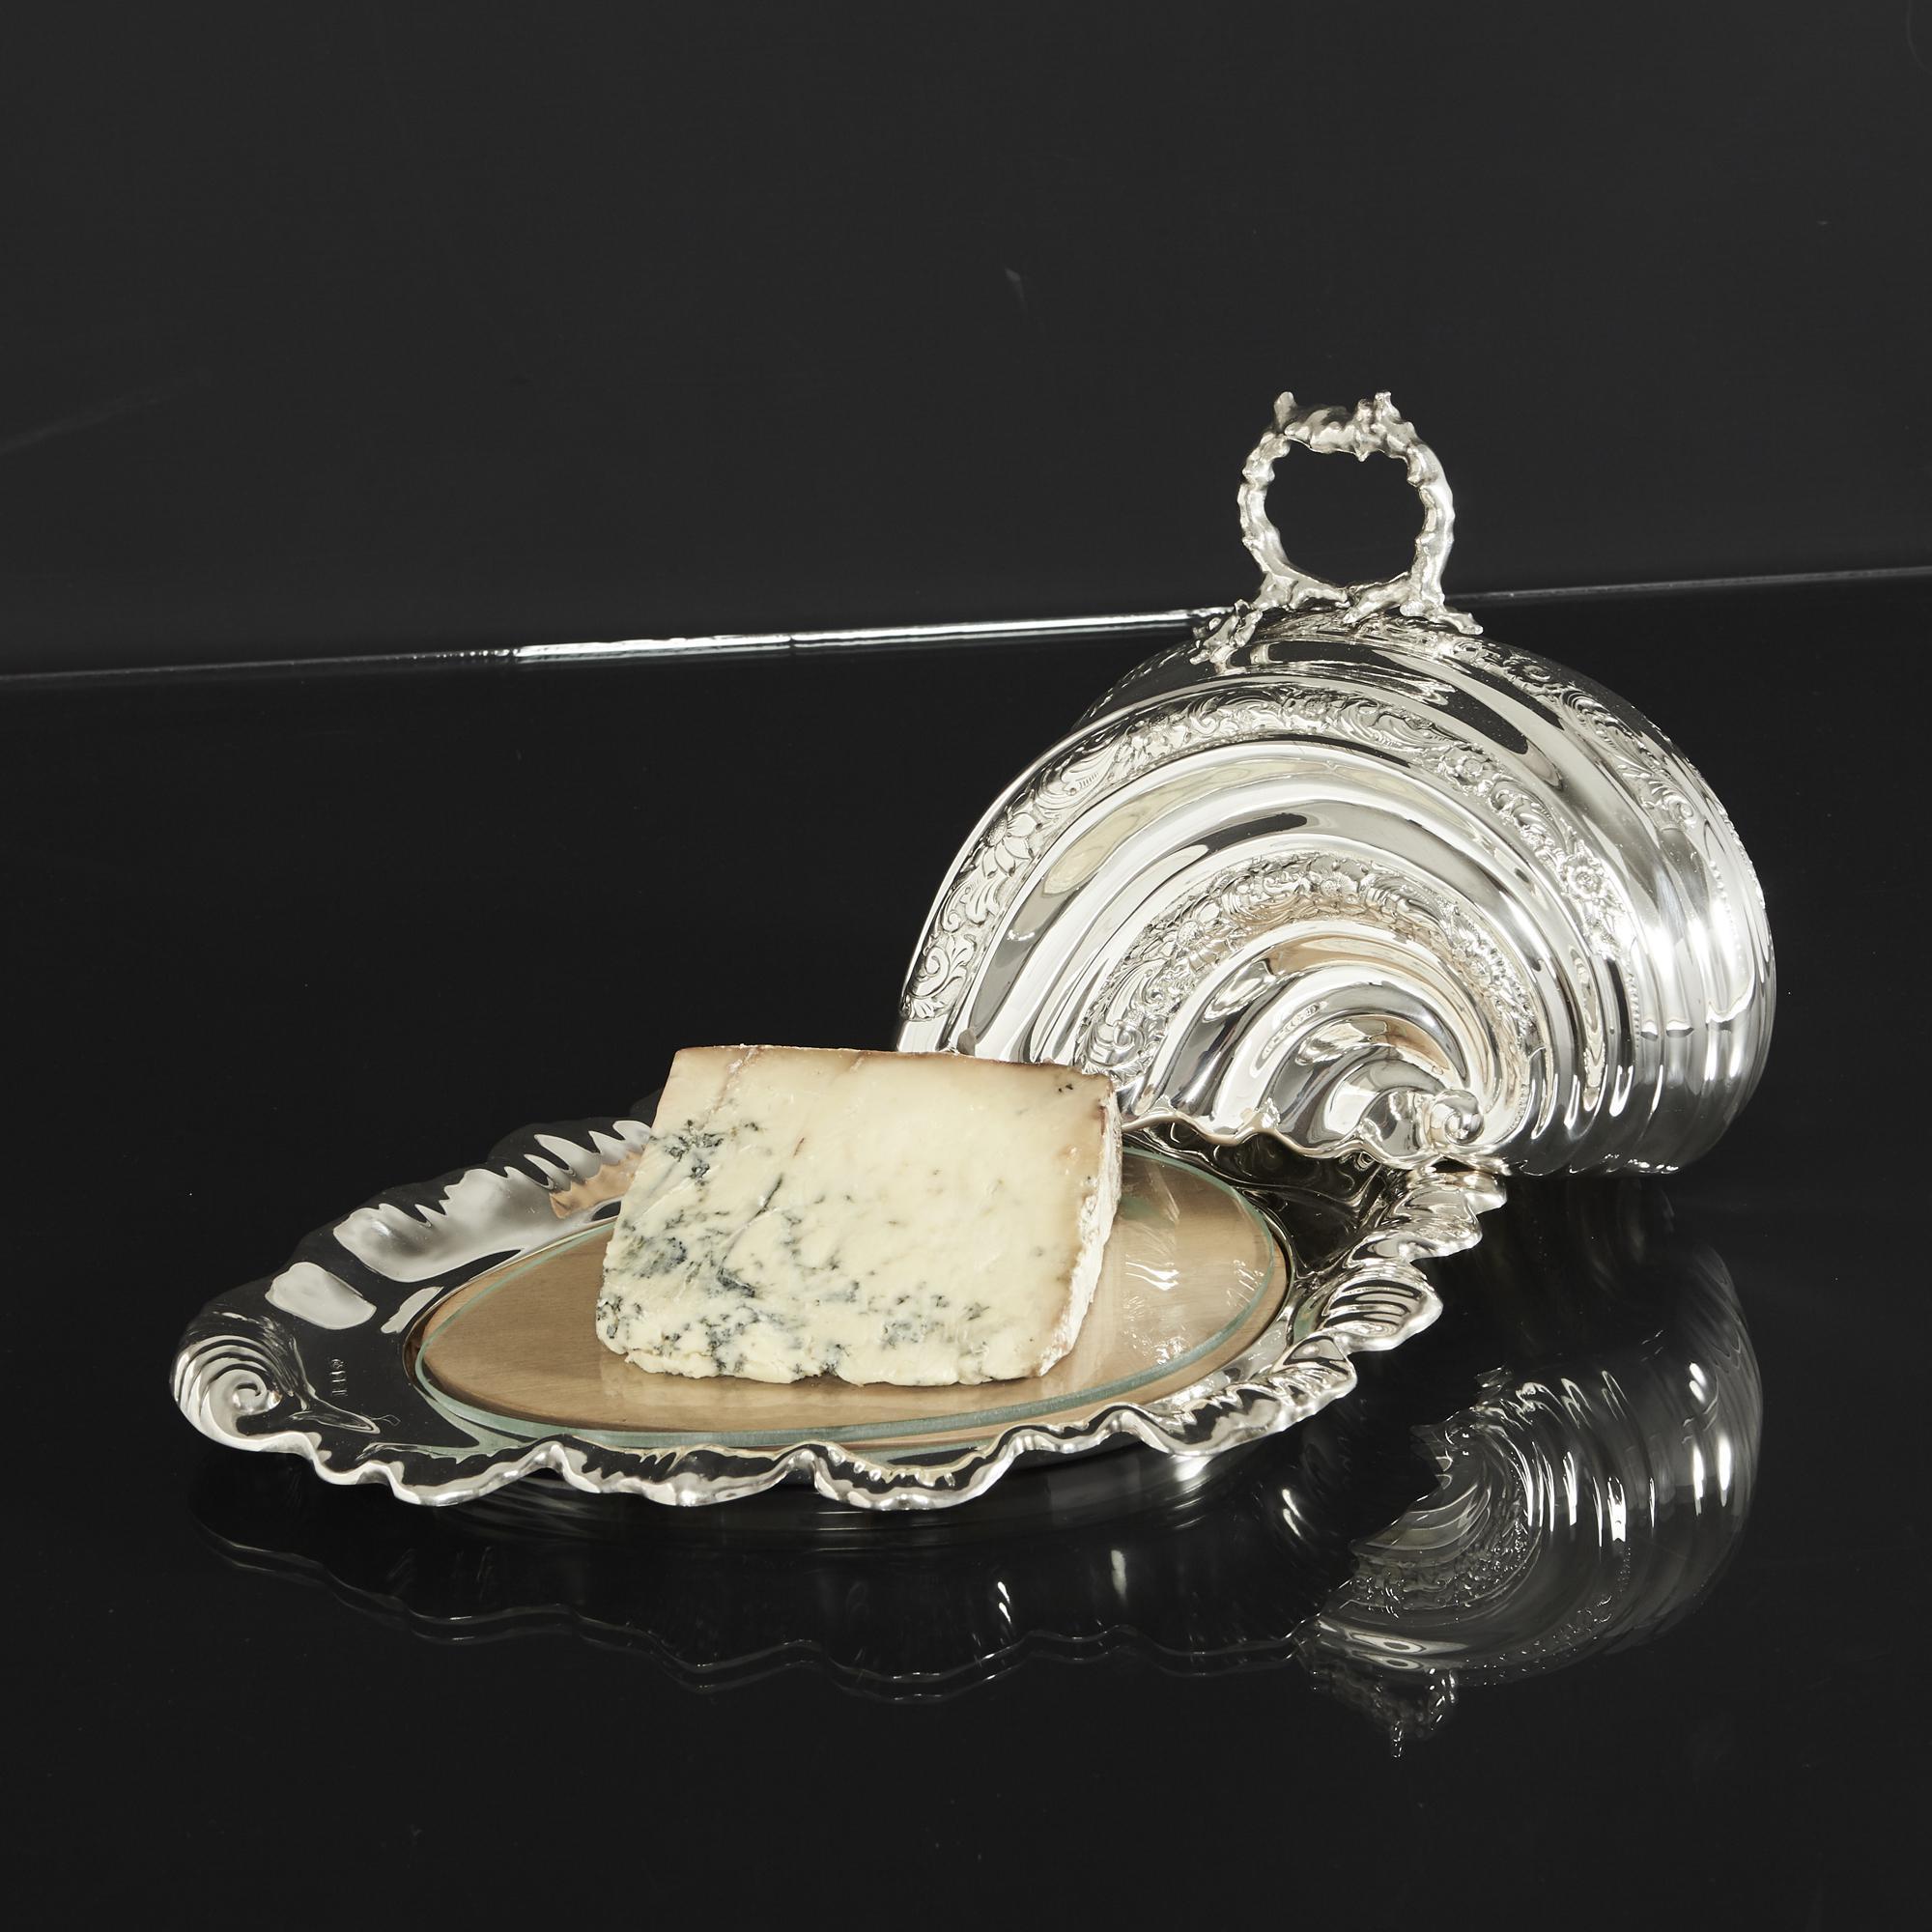 A rare and interesting serving dish and lid with marine themes. The base has a wave effect border with stylised shell ending and has been fitted with a wooden serving board. The lid is formed as a seashell with bands of hand-chased floral decoration